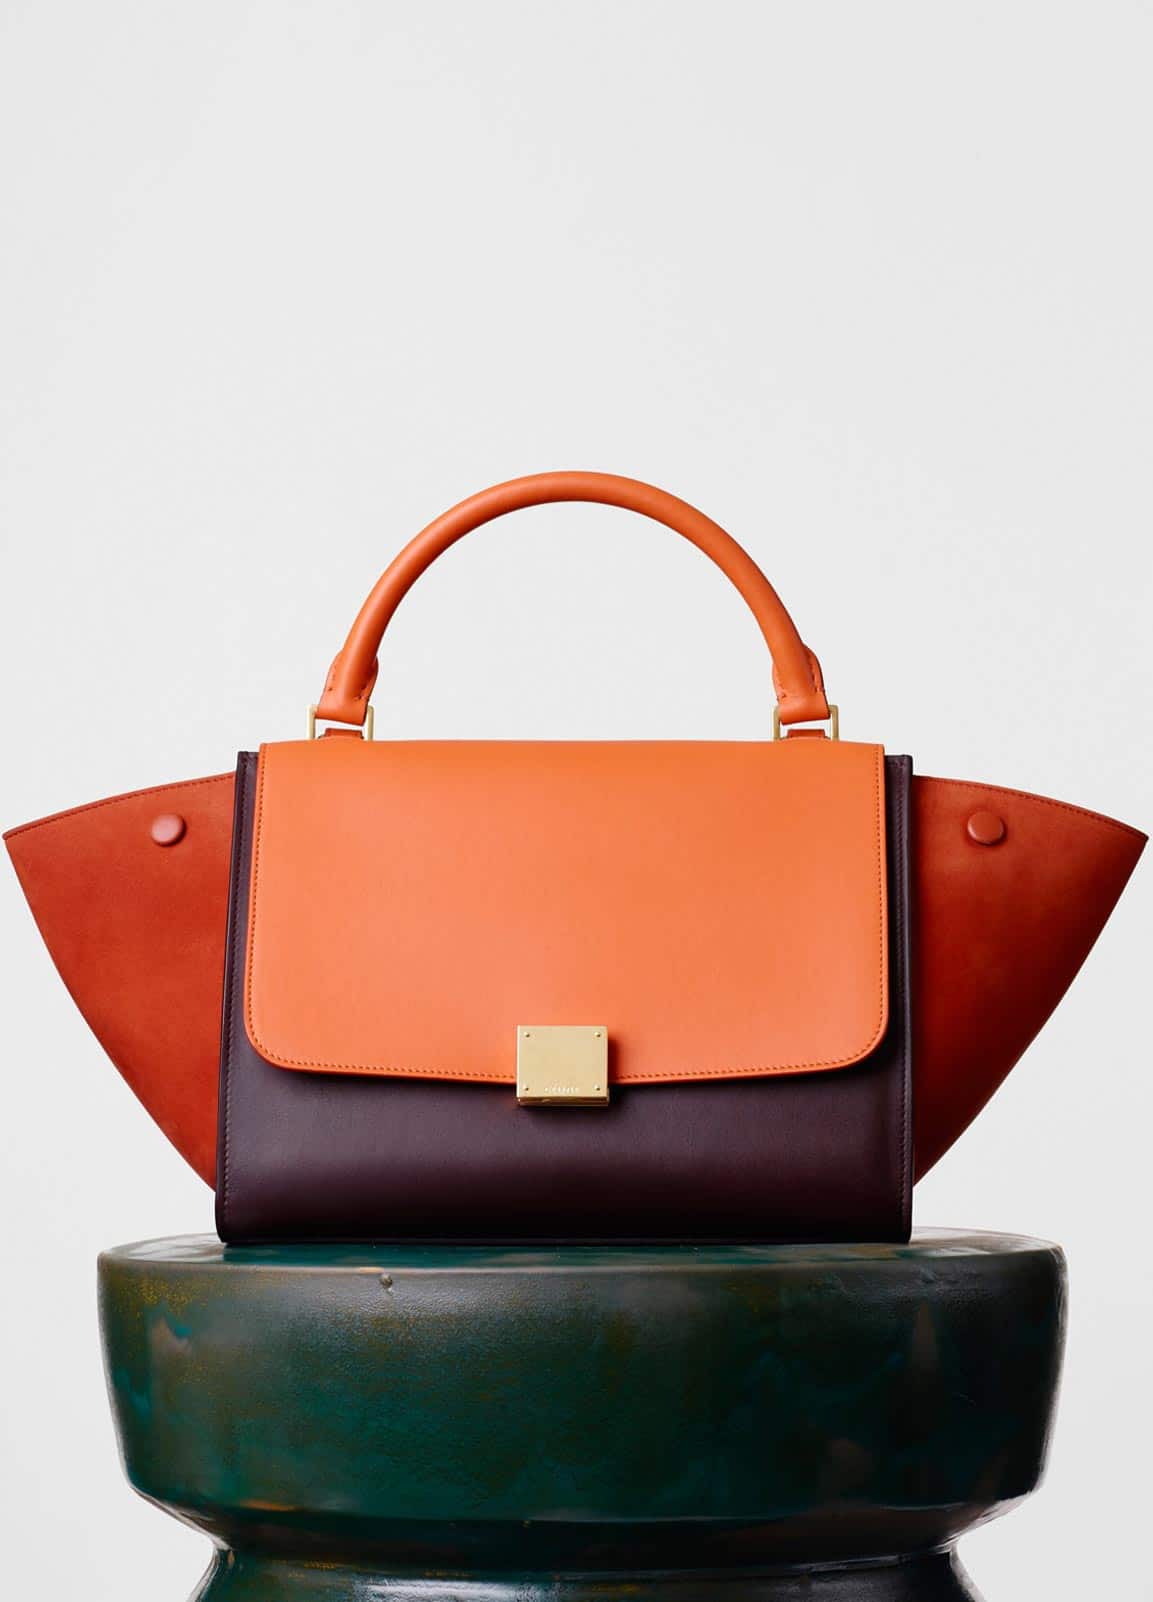 Celine Winter 2015 Bag Collection Featuring Subtropical Shades and ...  